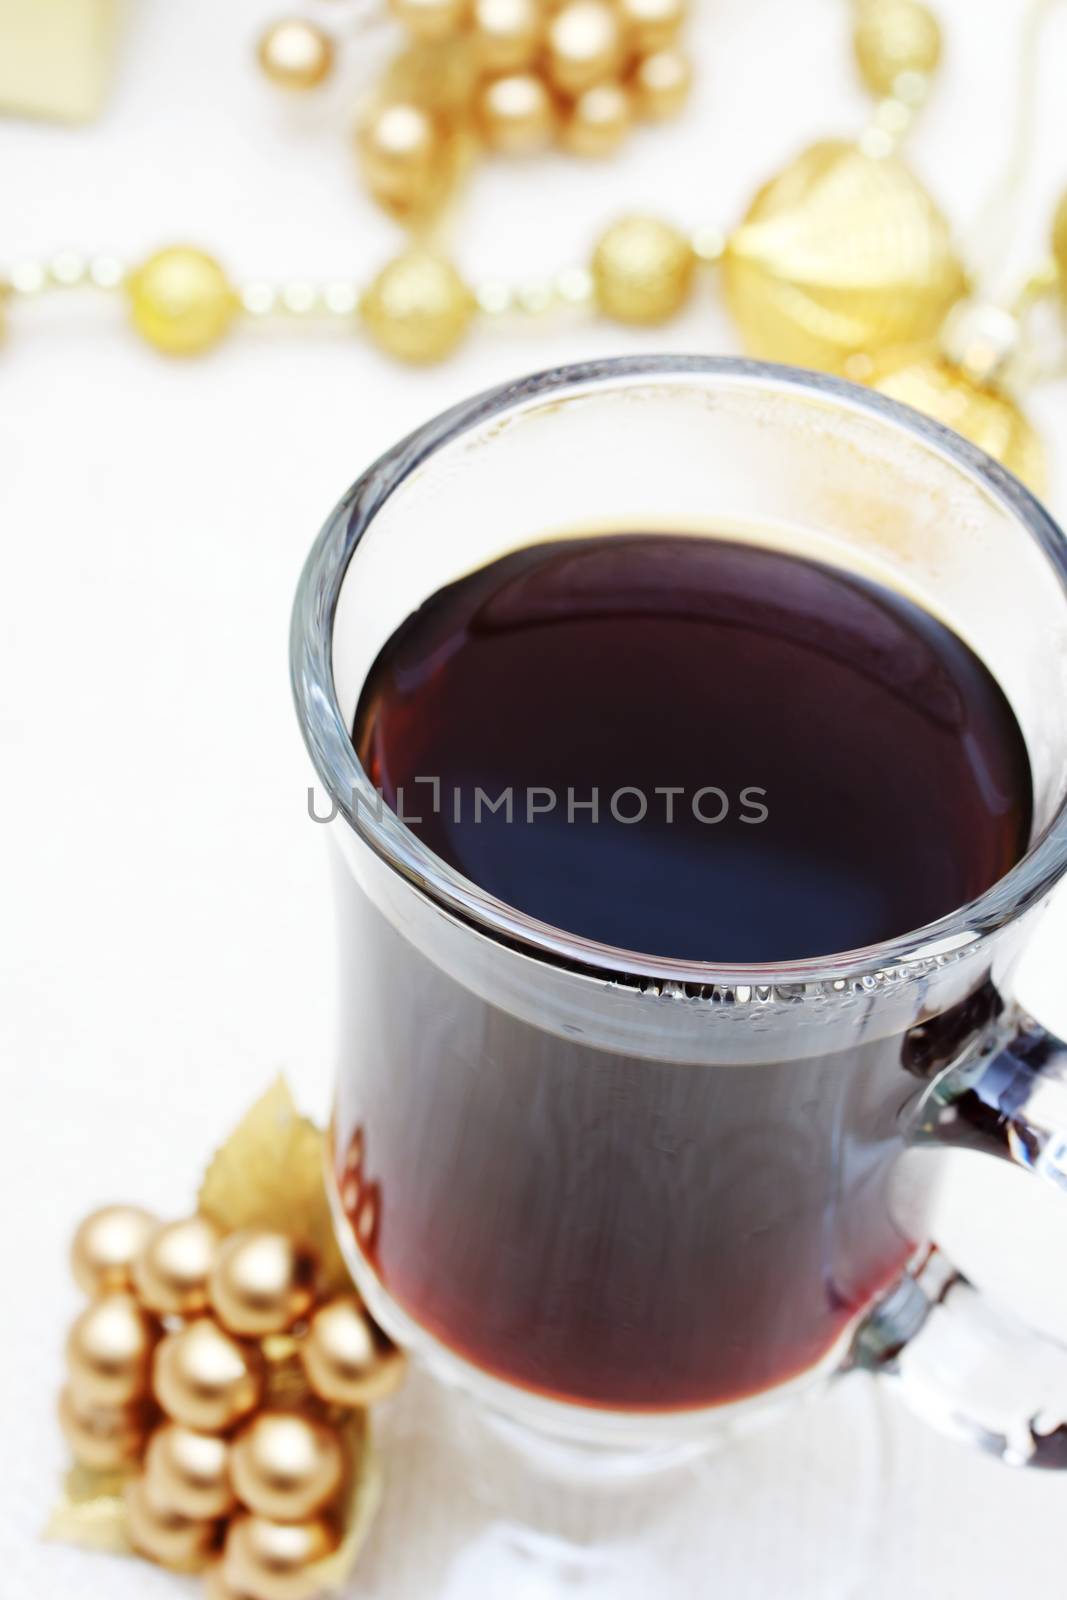 Cup of Coffee with Christmas Ornaments by melpomene